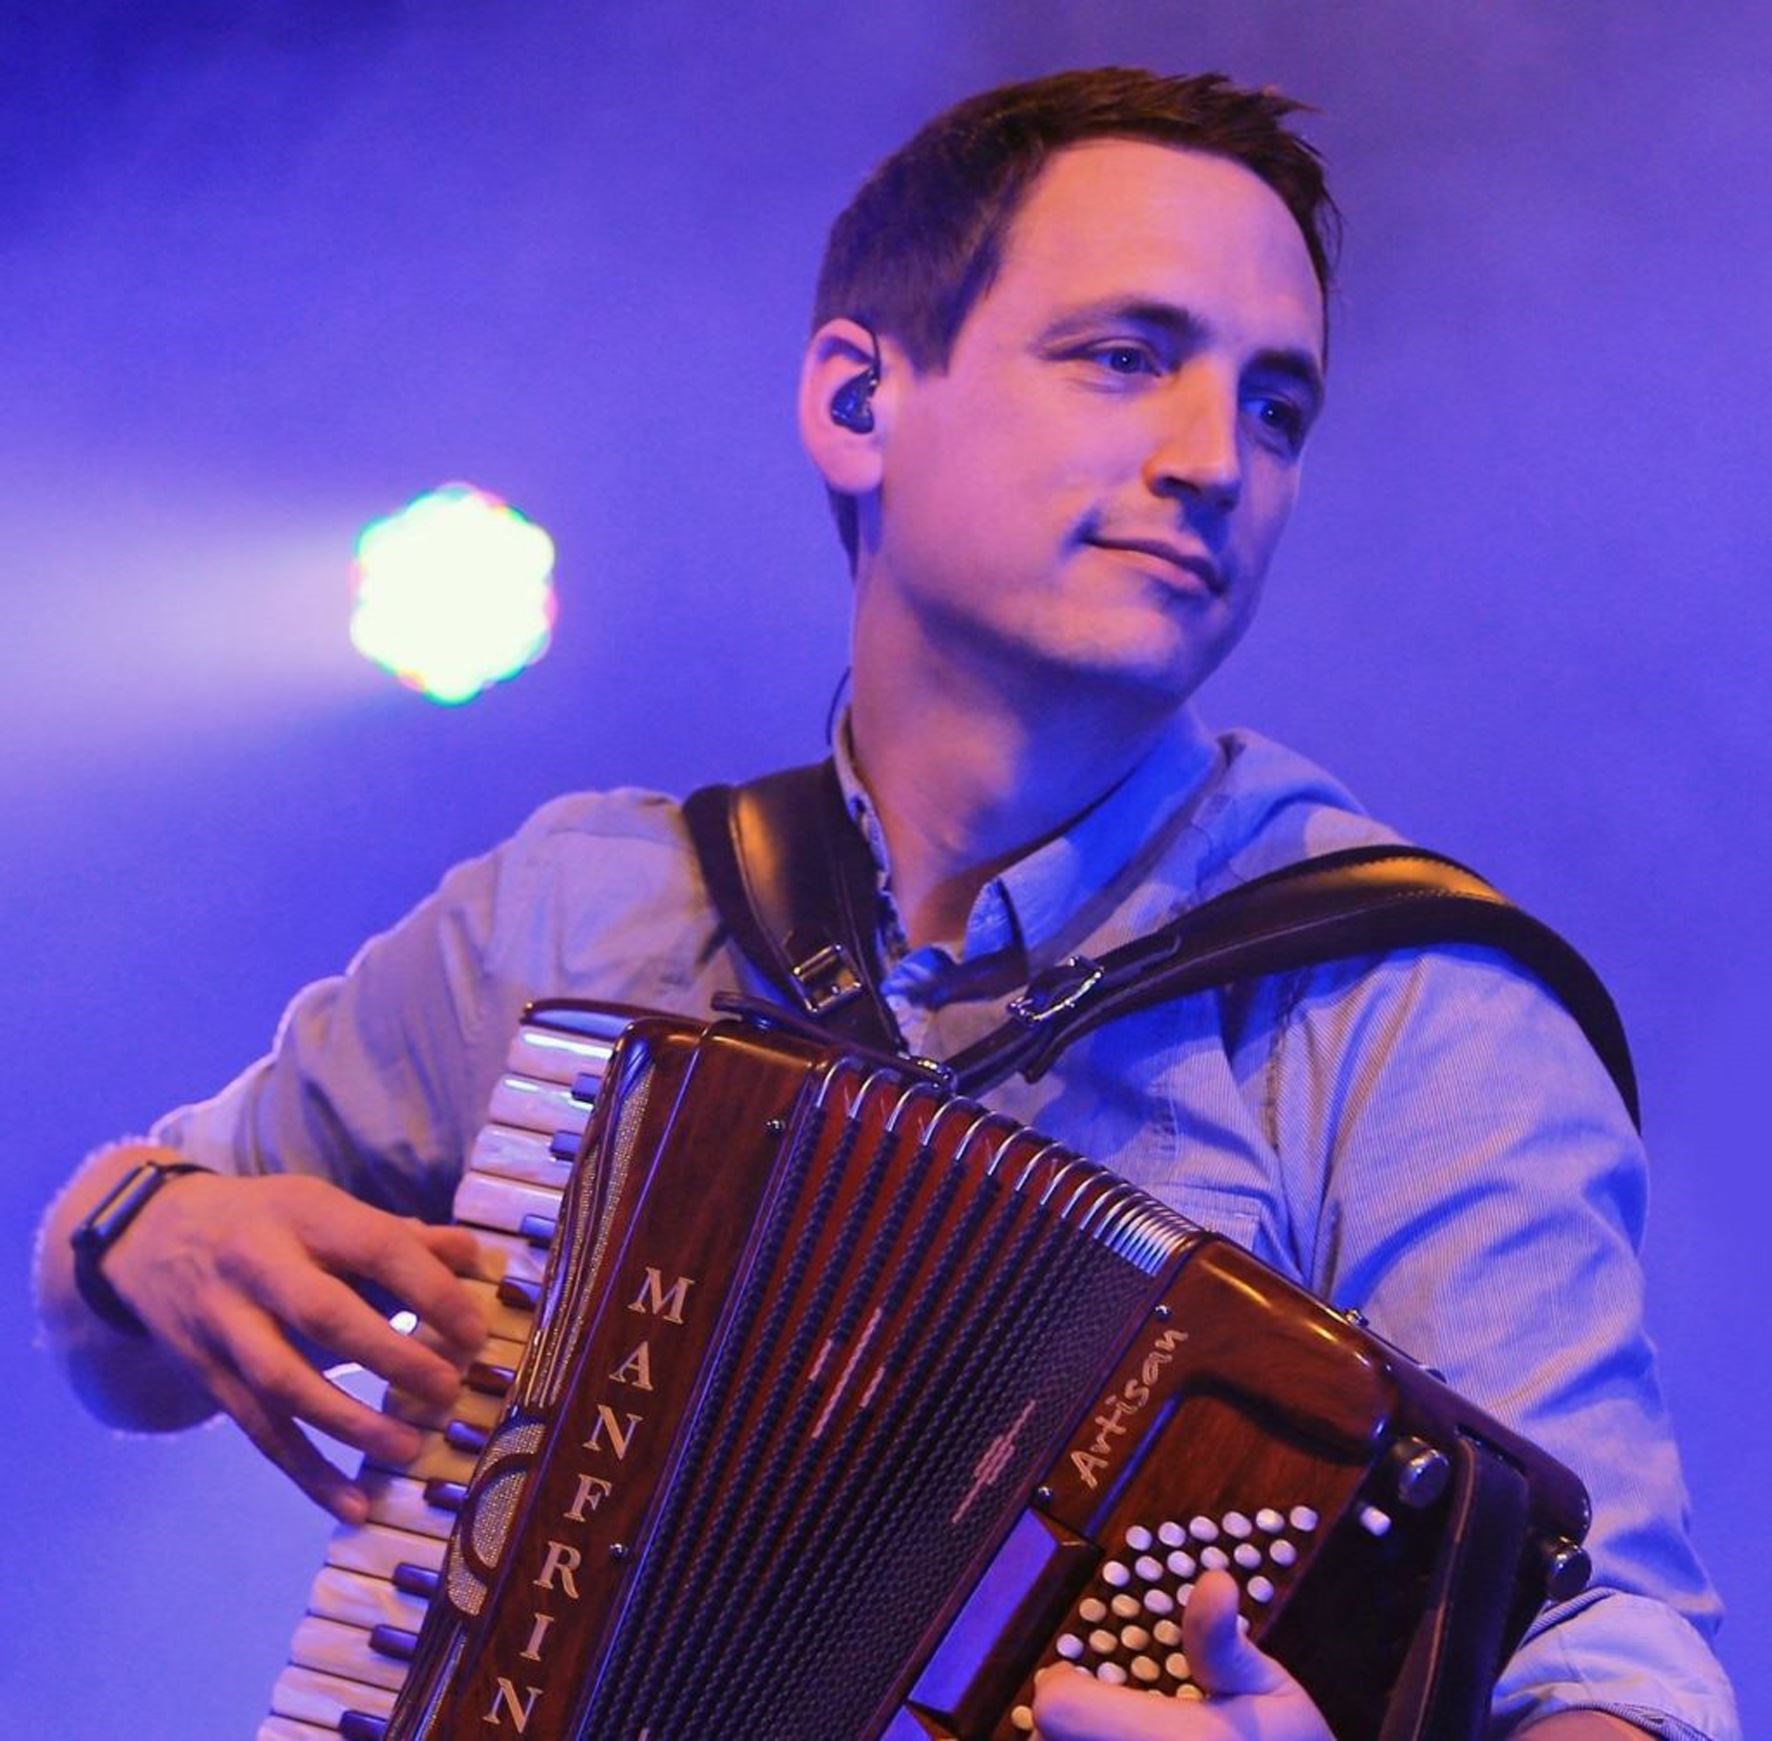 Accordionist Gary Innes from the band Manran will be leading some traditional music sessions.